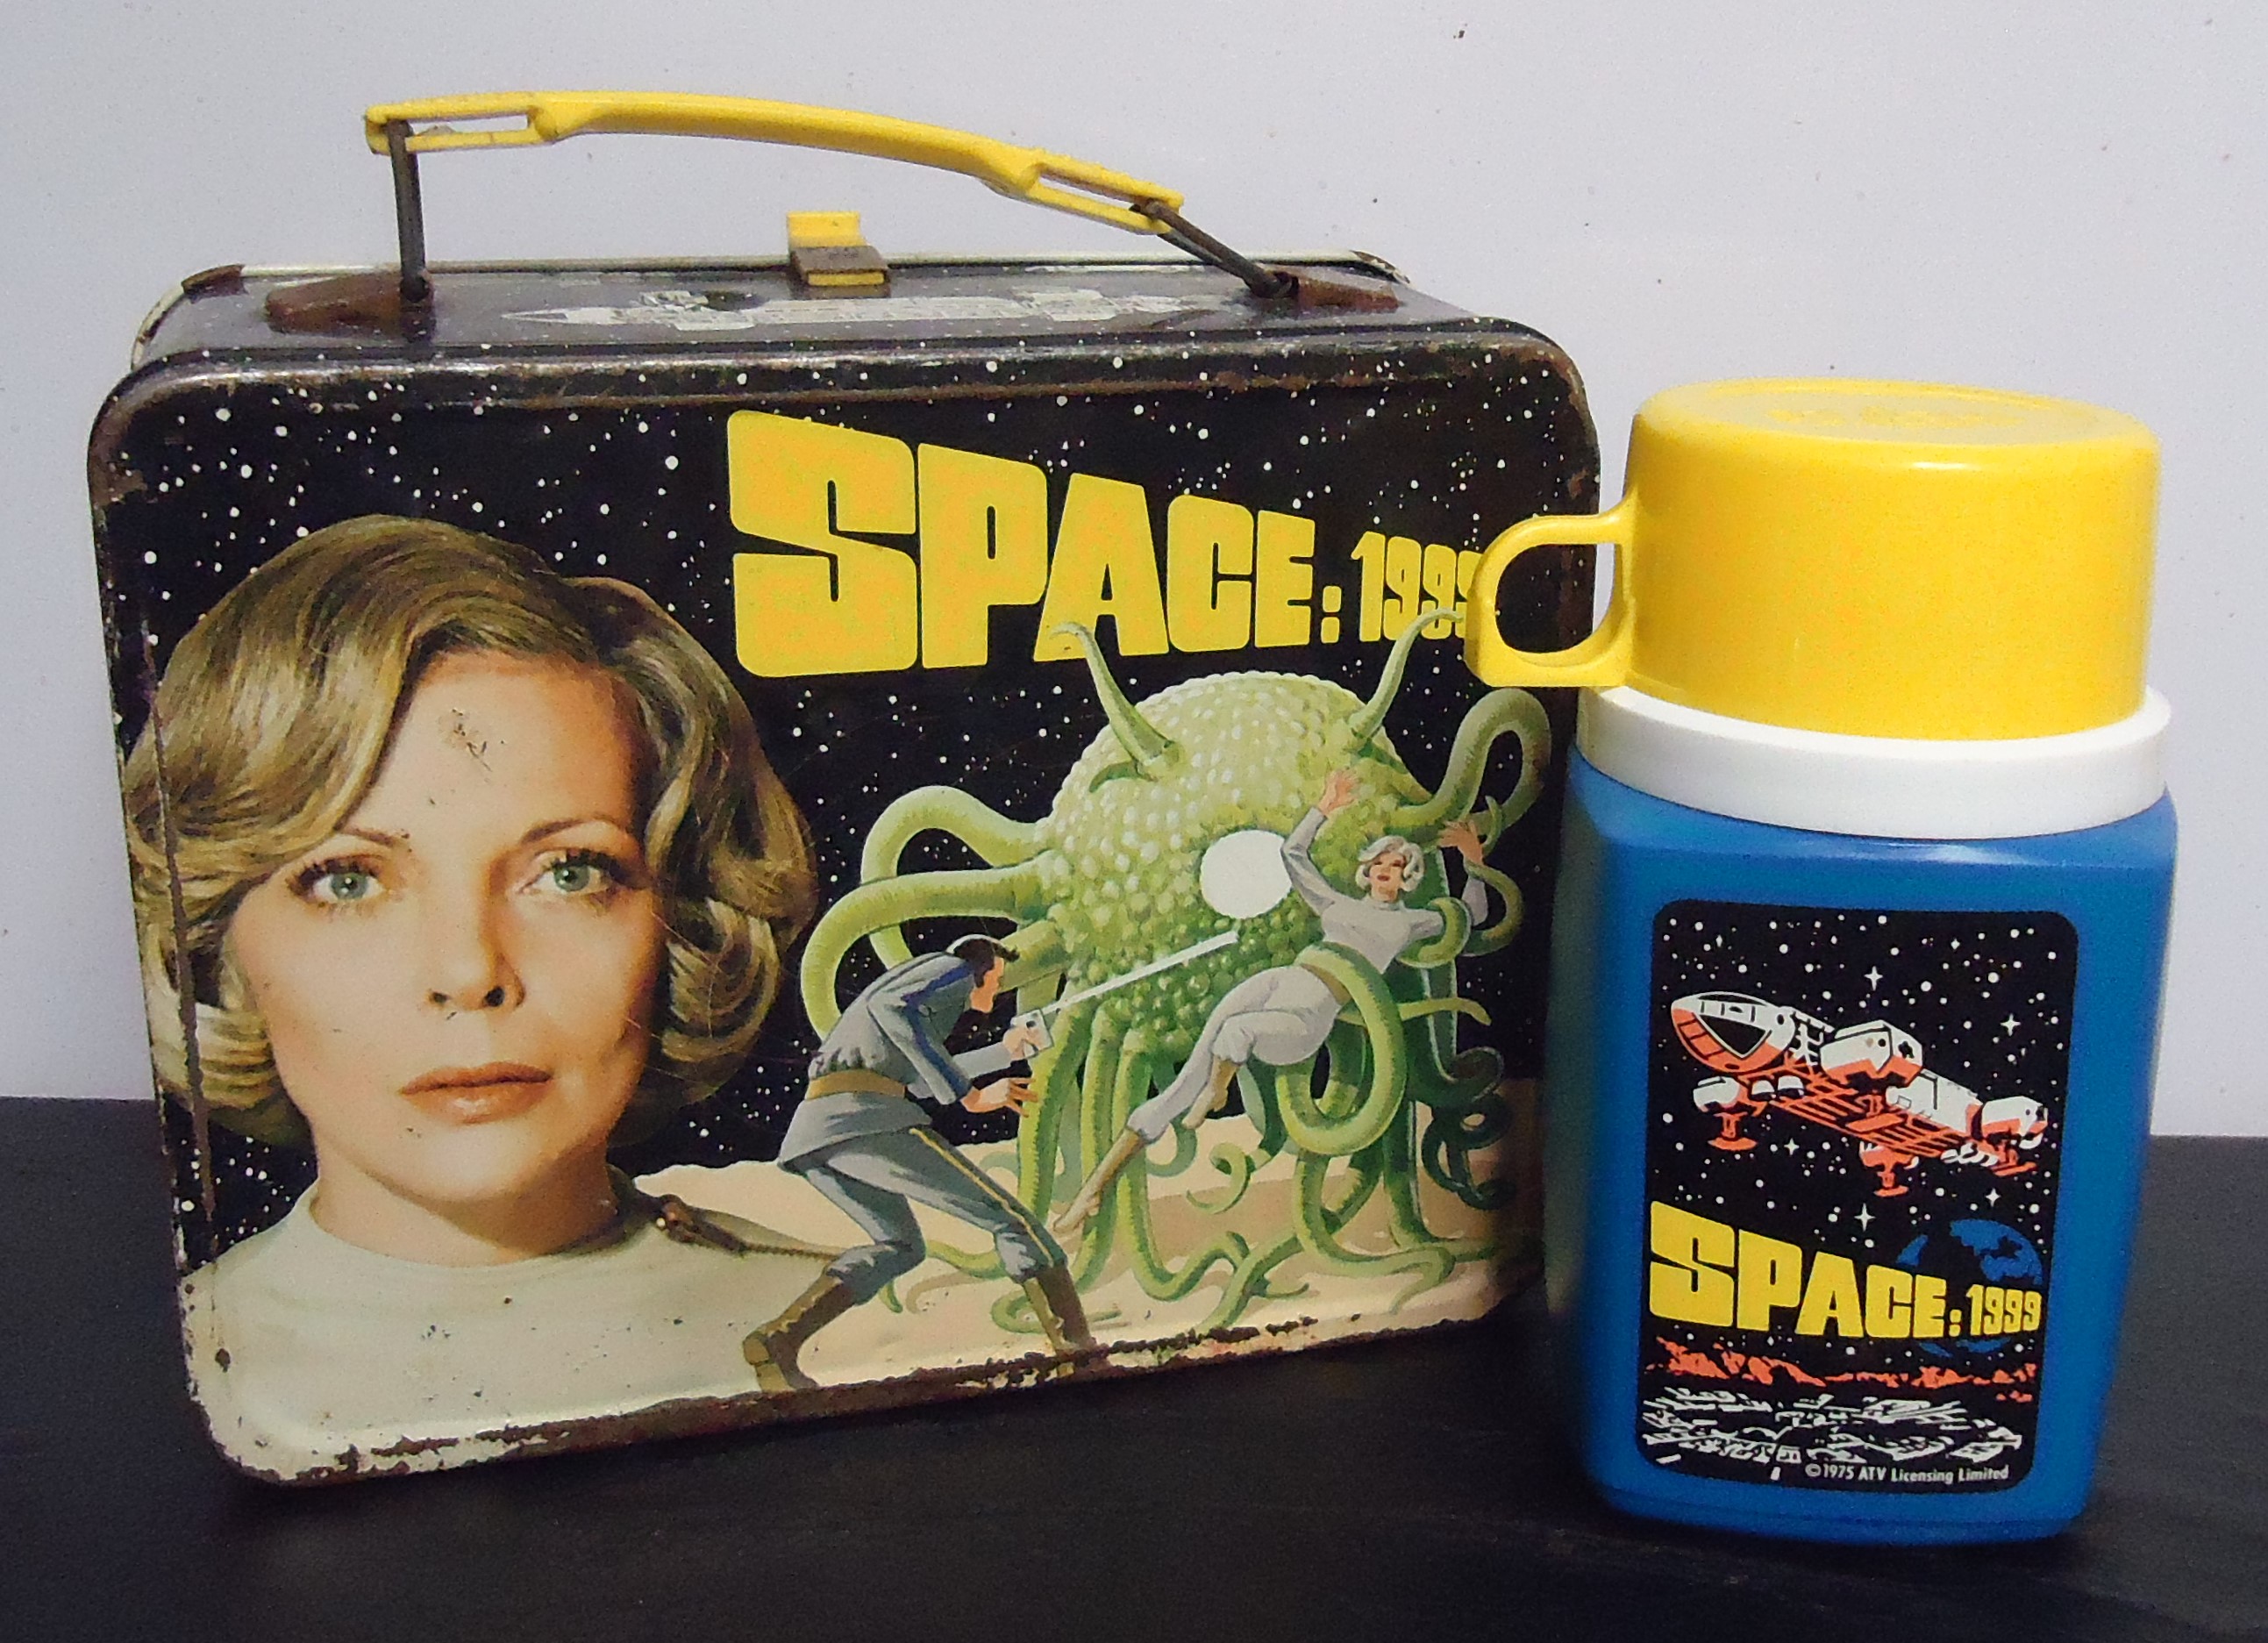 (7) "Space: 1999" Metal Lunch Box
W/ Thermos
$38.00